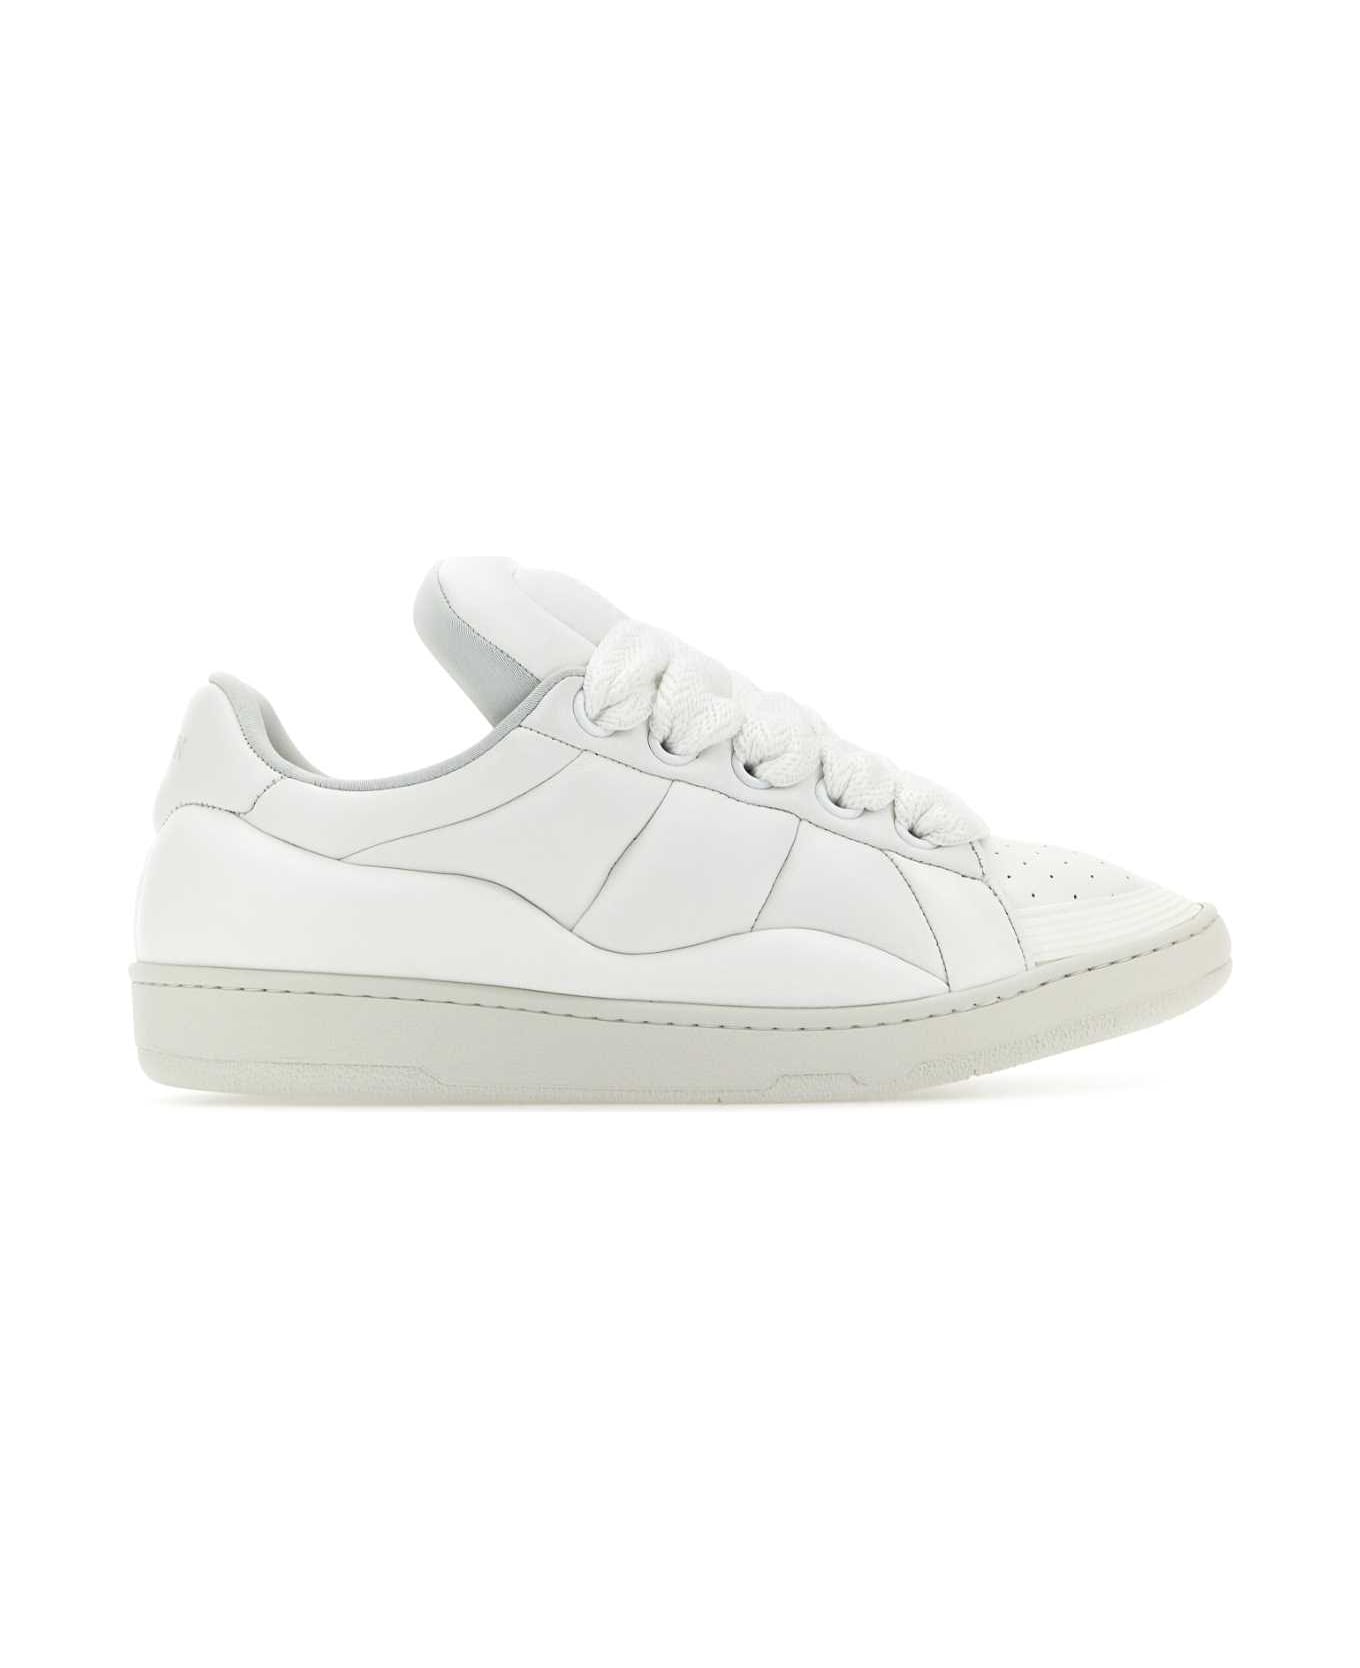 Lanvin White Nappa Leather Curb Xl Sneakers - WHITEWHITE スニーカー